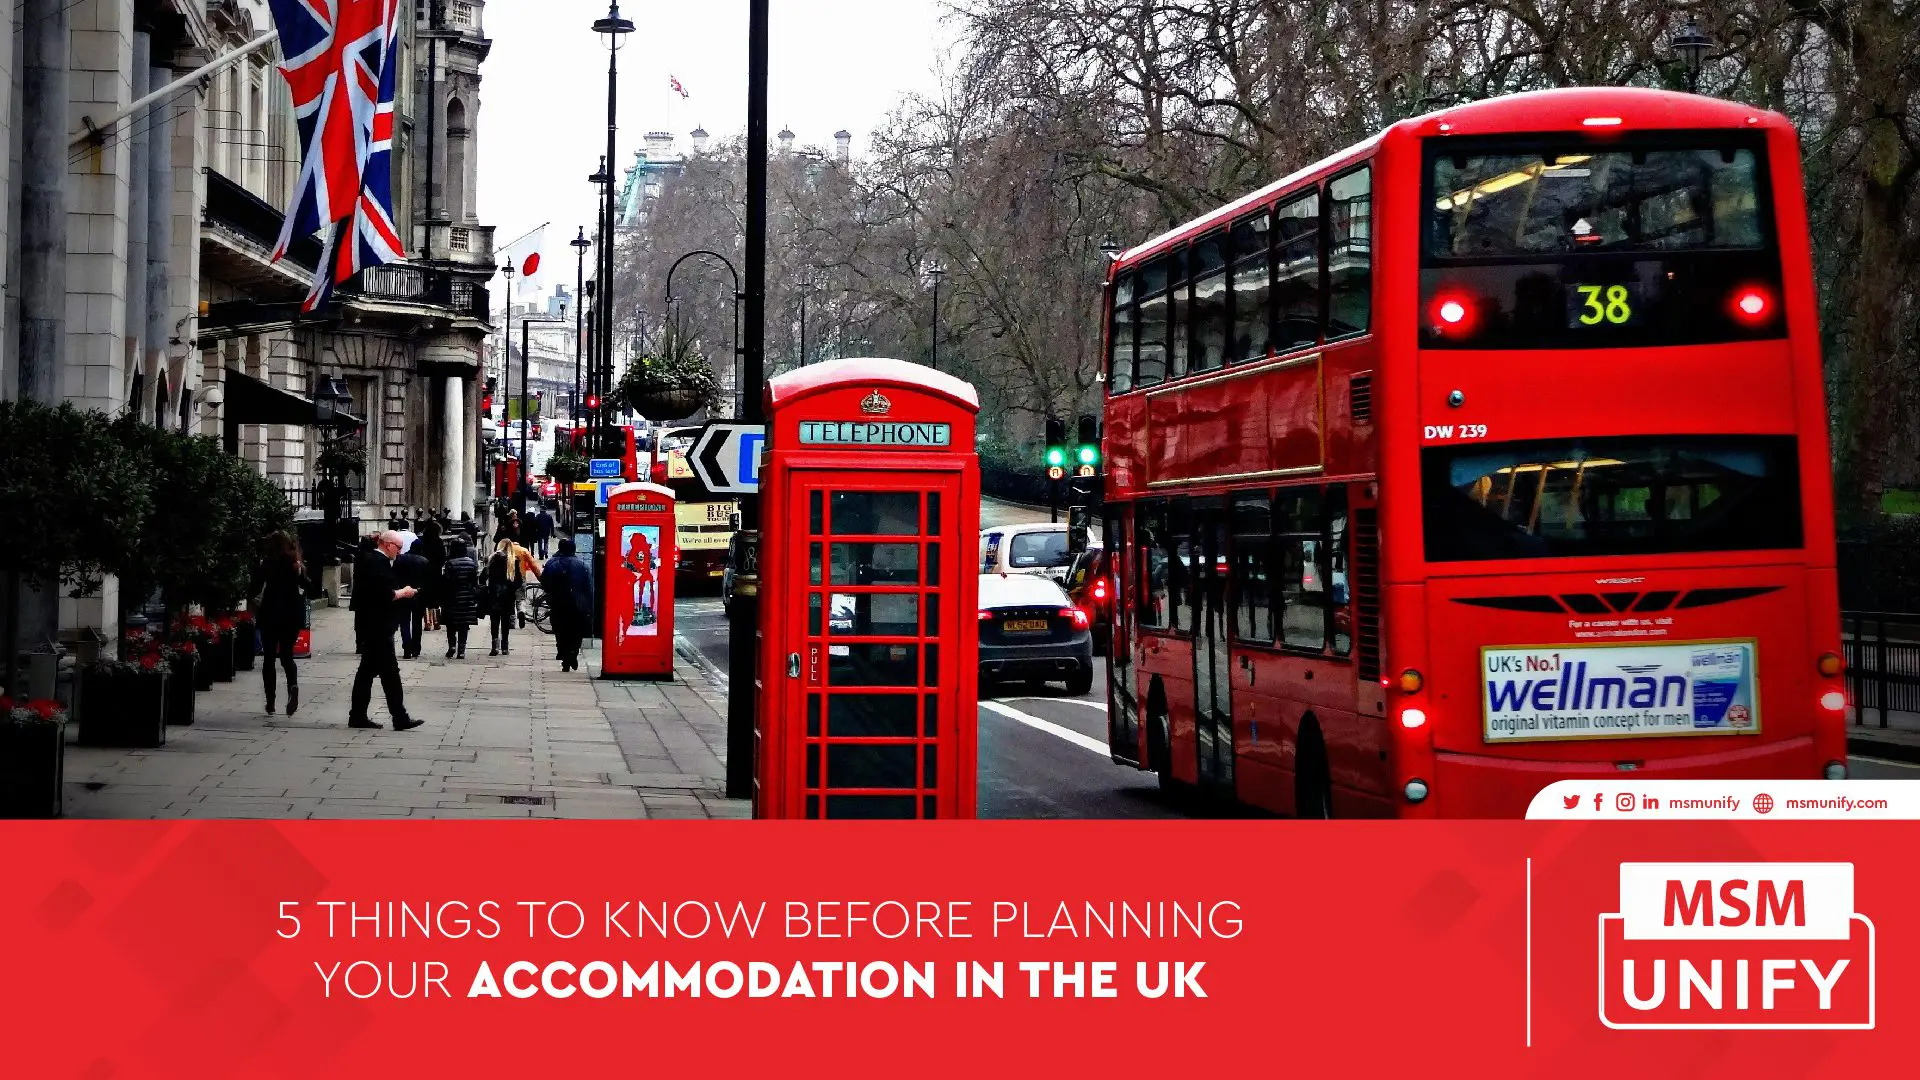 111422 MSM Unify 5 Things to Know Before Planning Your Accommodation in the UK 01